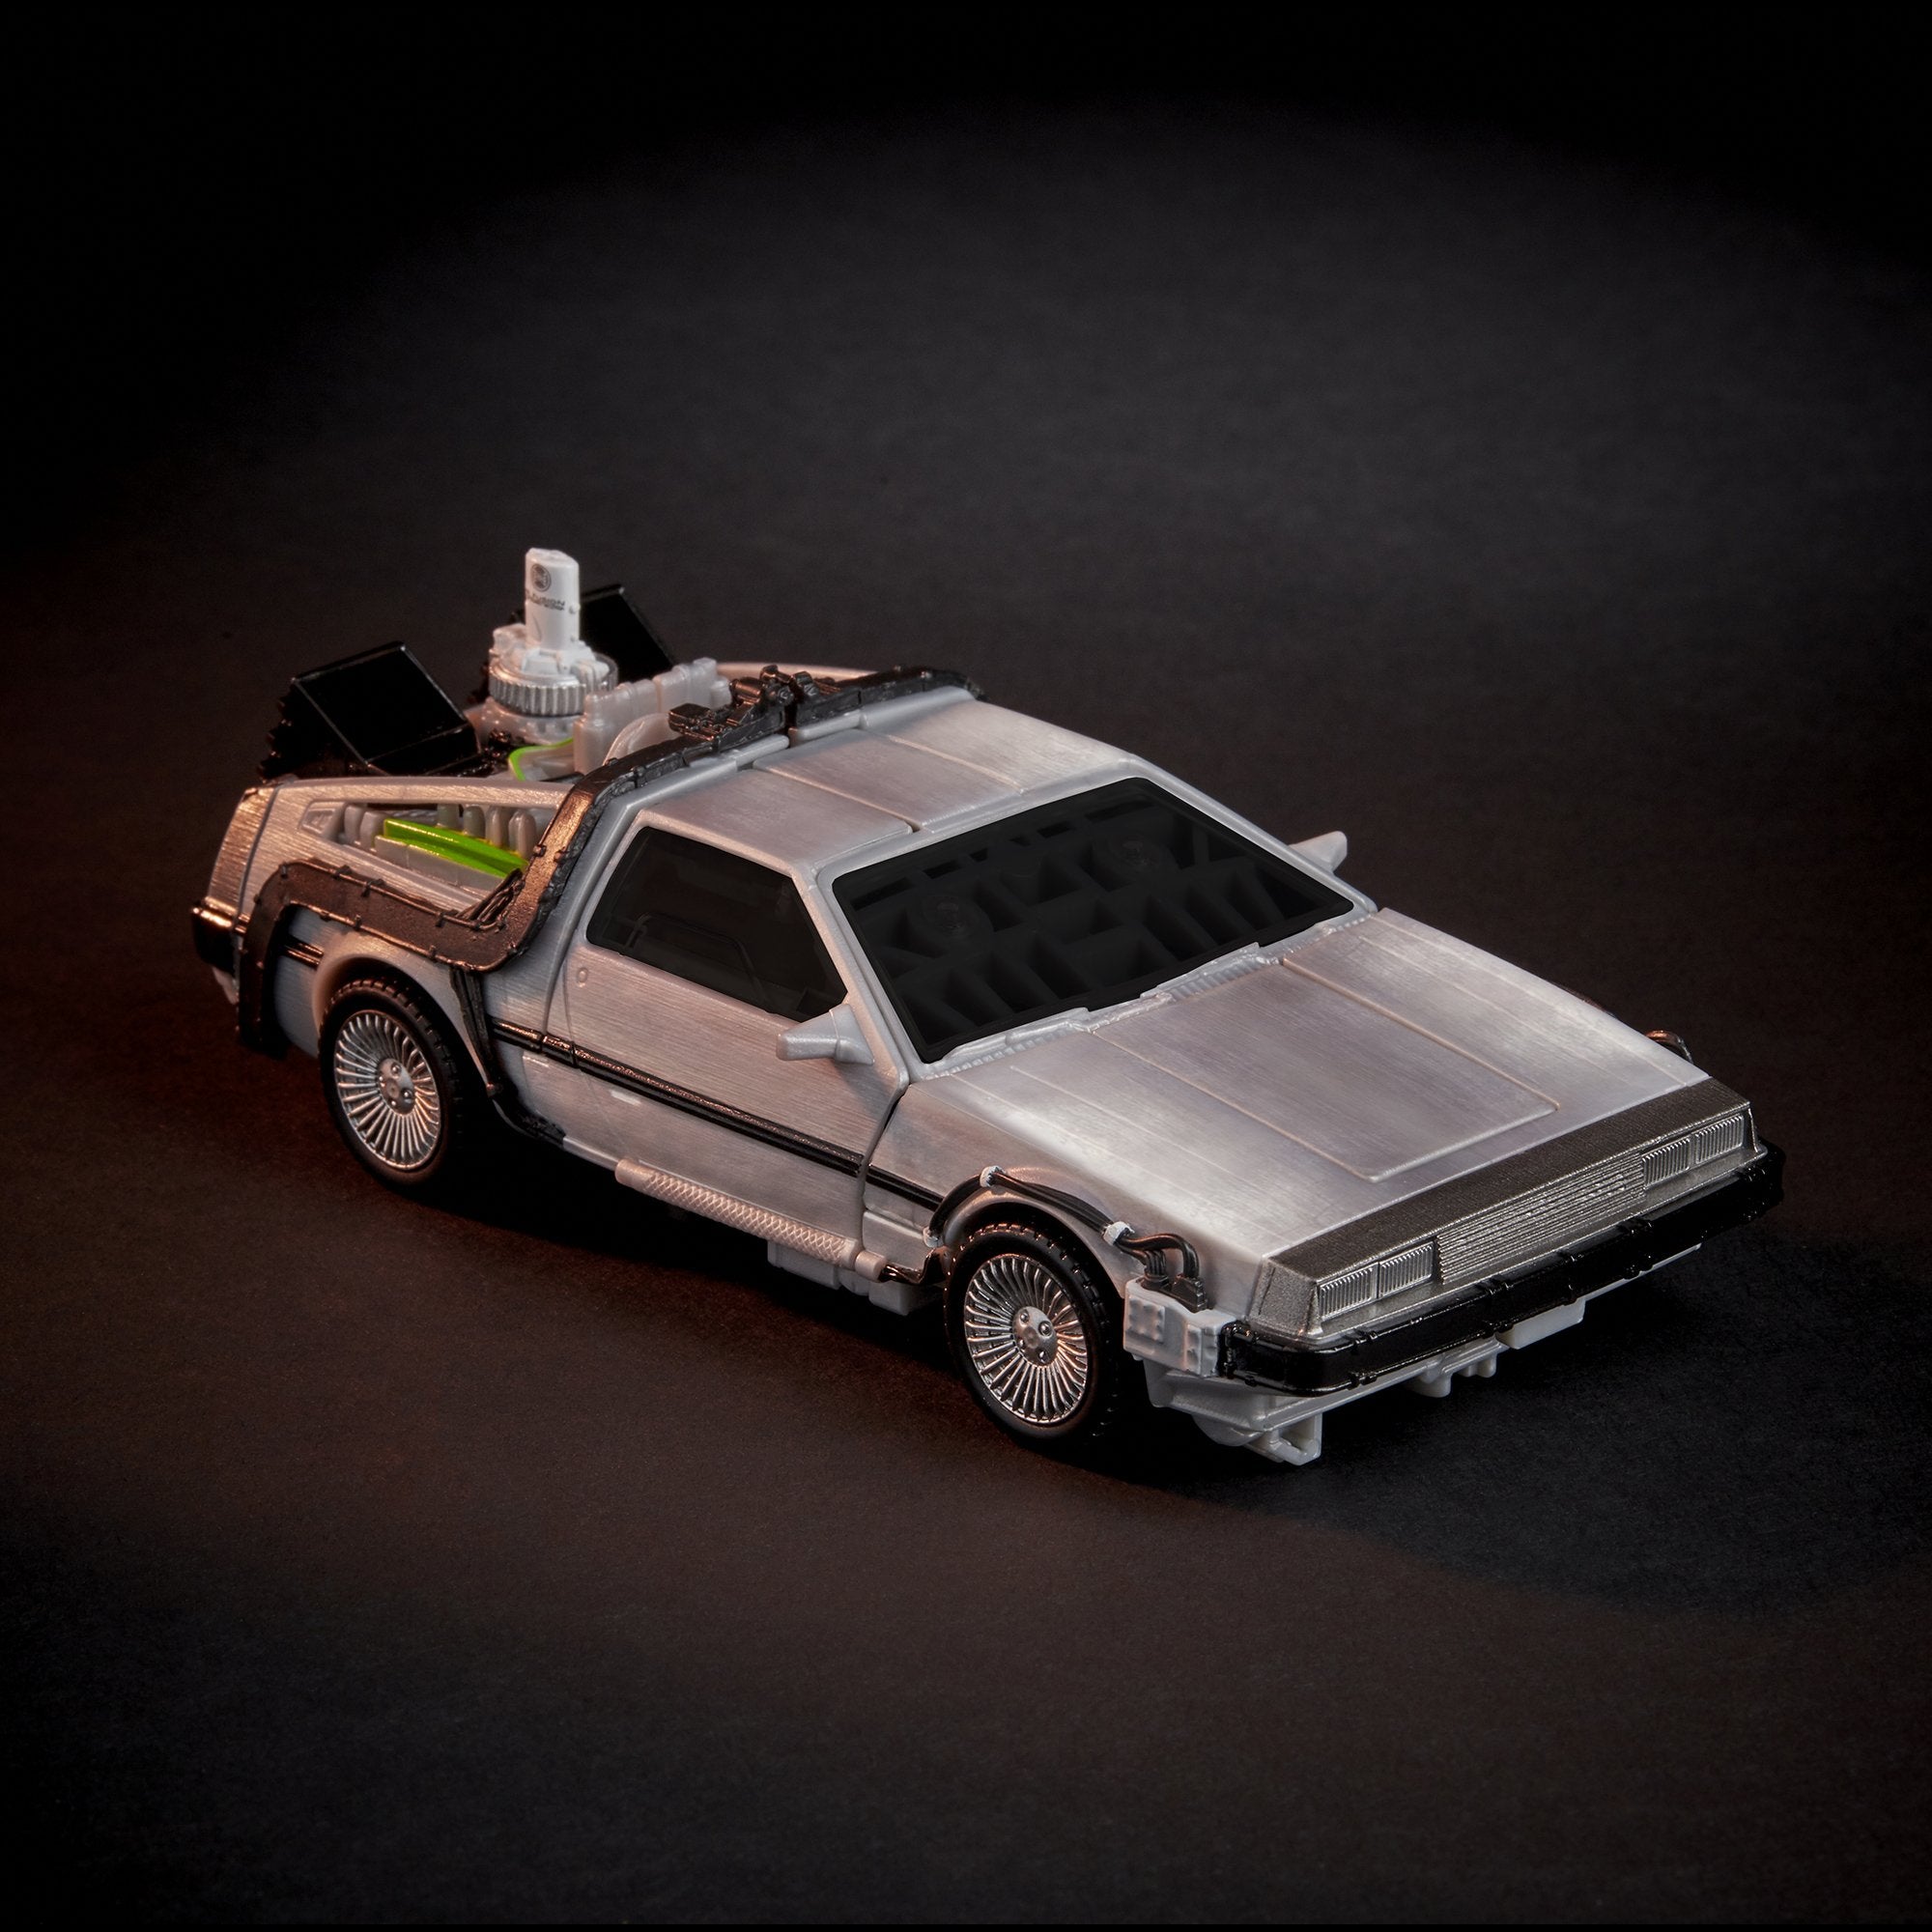 Transformers Generations Collaborative Back to the Future Mash-Up Gigawatt Action Figure